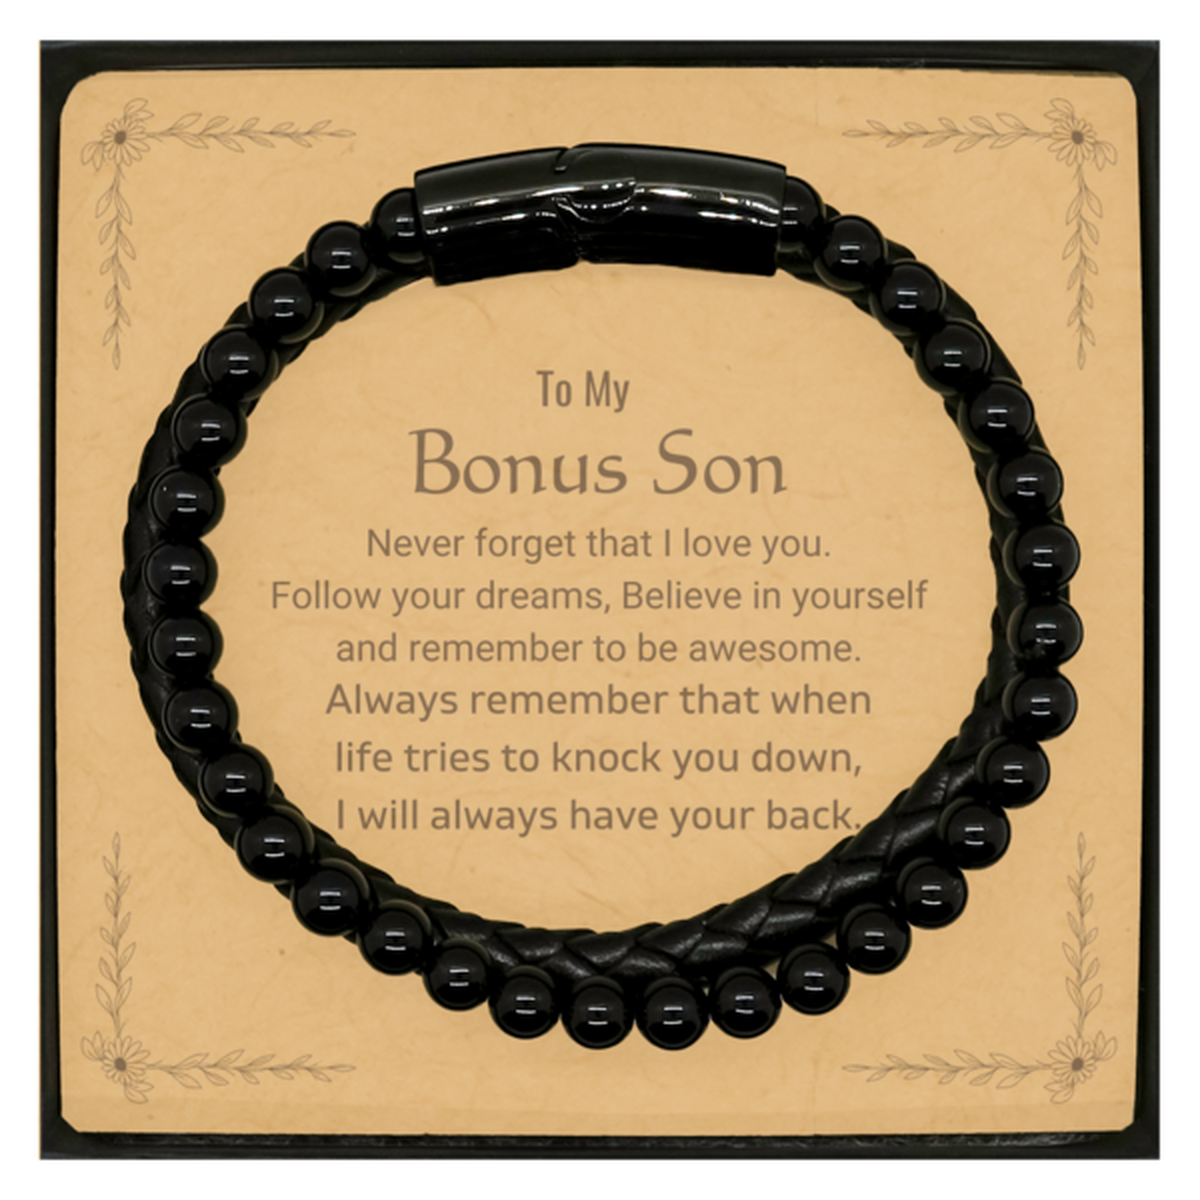 Inspirational Gifts for Bonus Son, Follow your dreams, Believe in yourself, Bonus Son Stone Leather Bracelets, Birthday Christmas Unique Gifts For Bonus Son